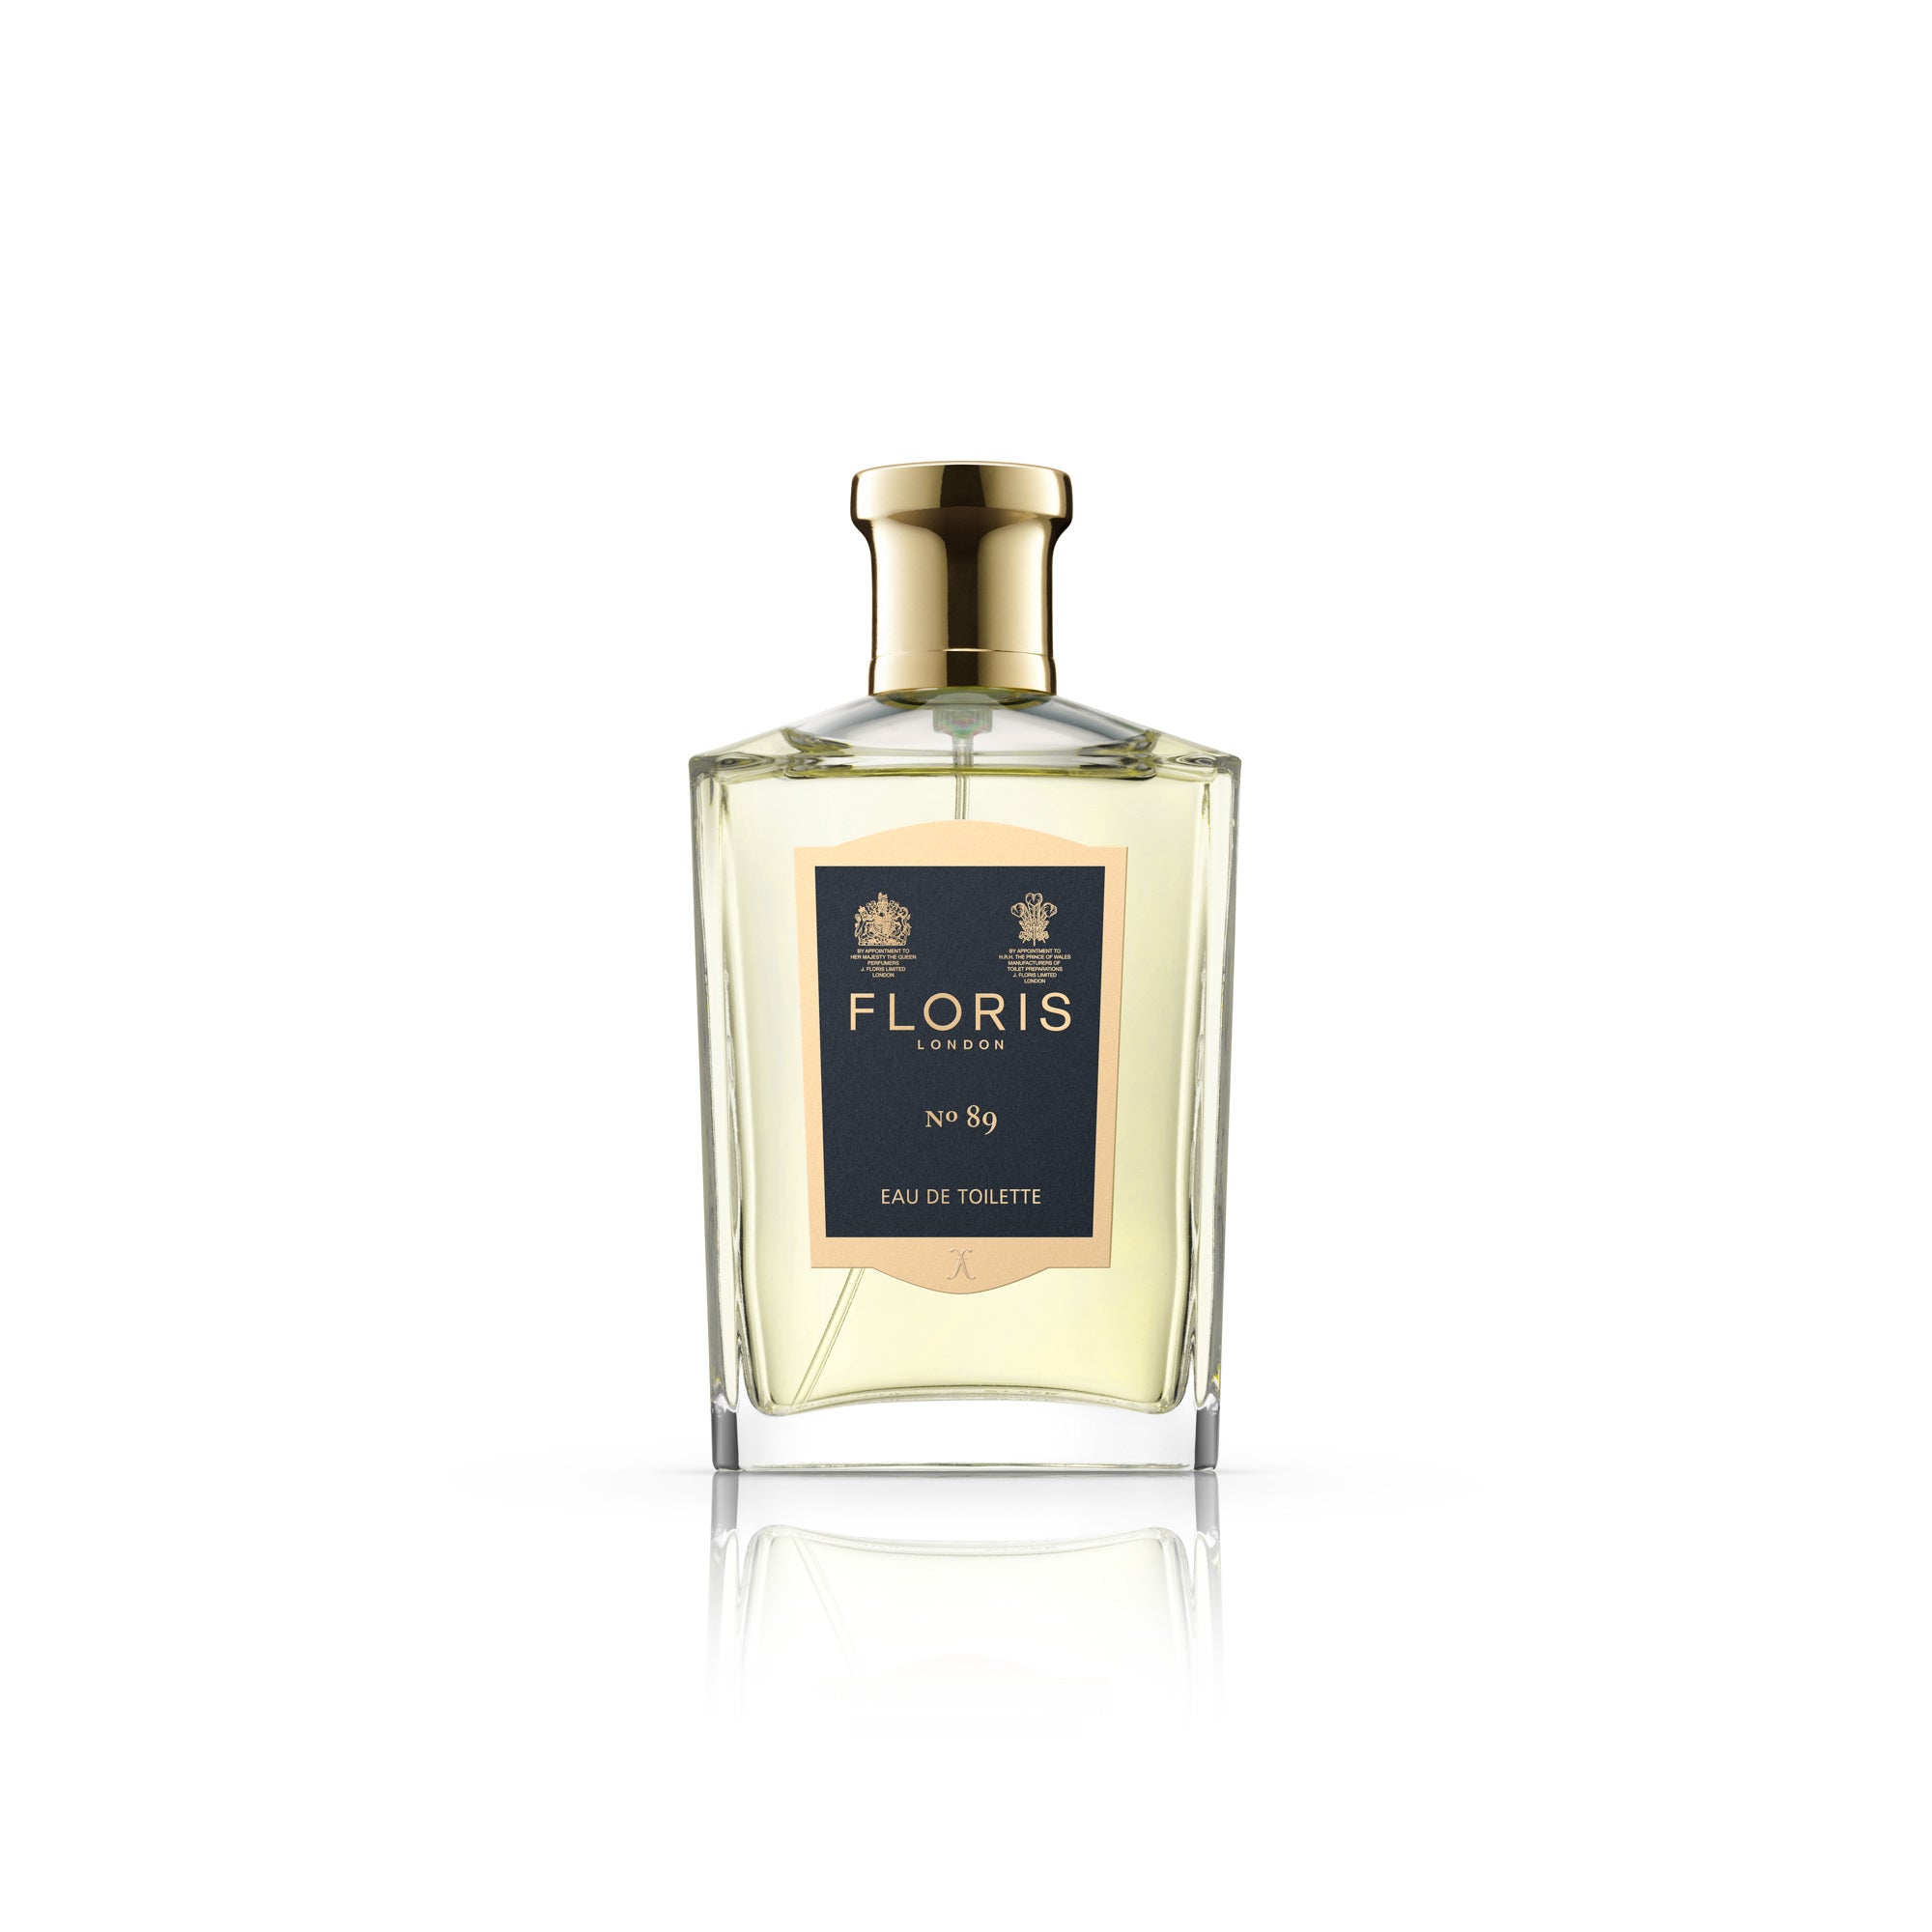 A bottle of FLORIS No.89 100 ML citrus fragrance cologne on a white background by KirbyAllison.com.